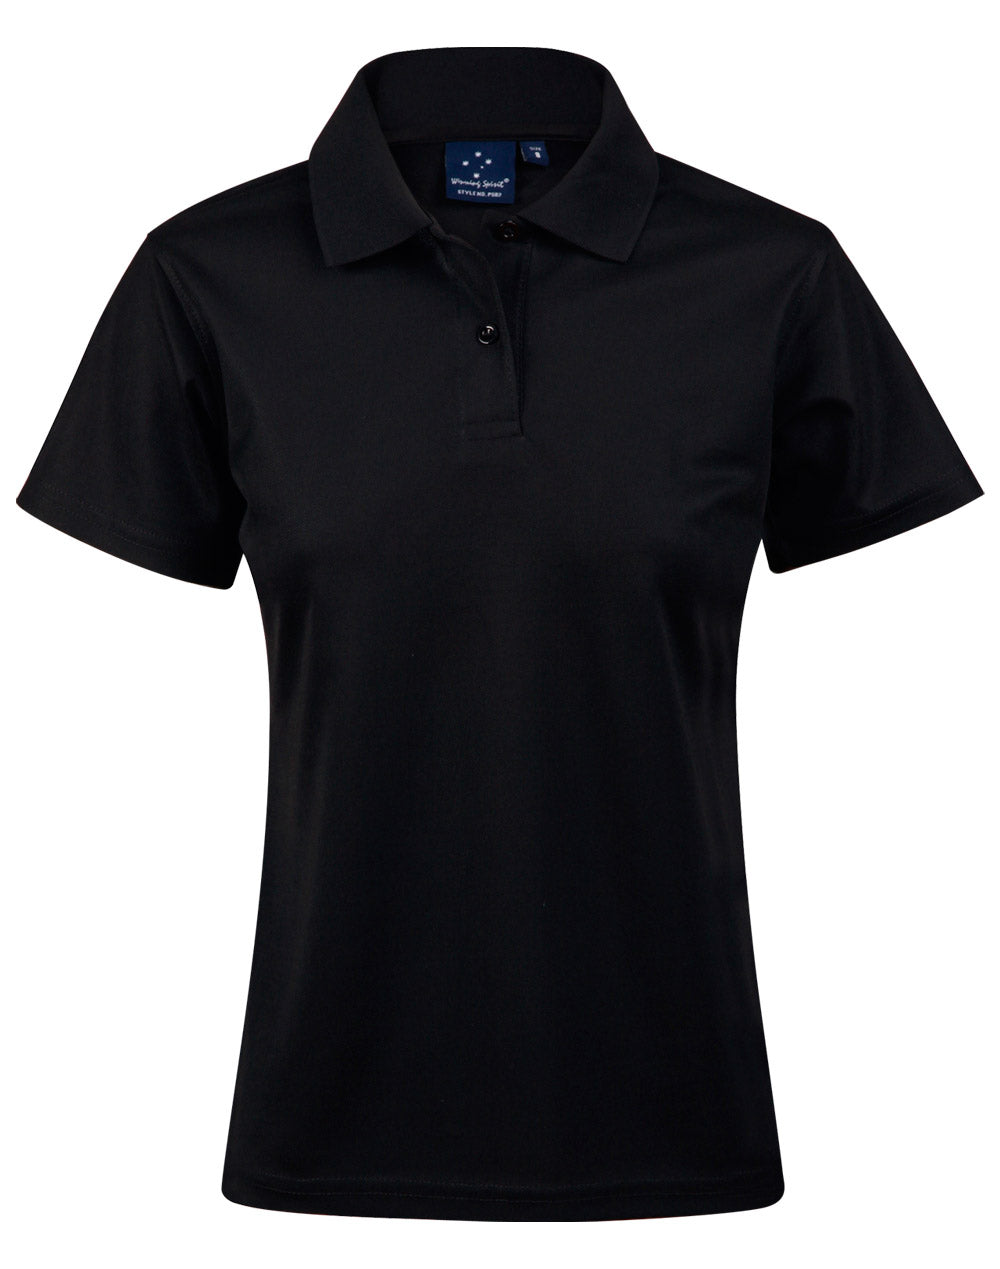 Ladies Verve Short Sleeve Polo - made by AIW